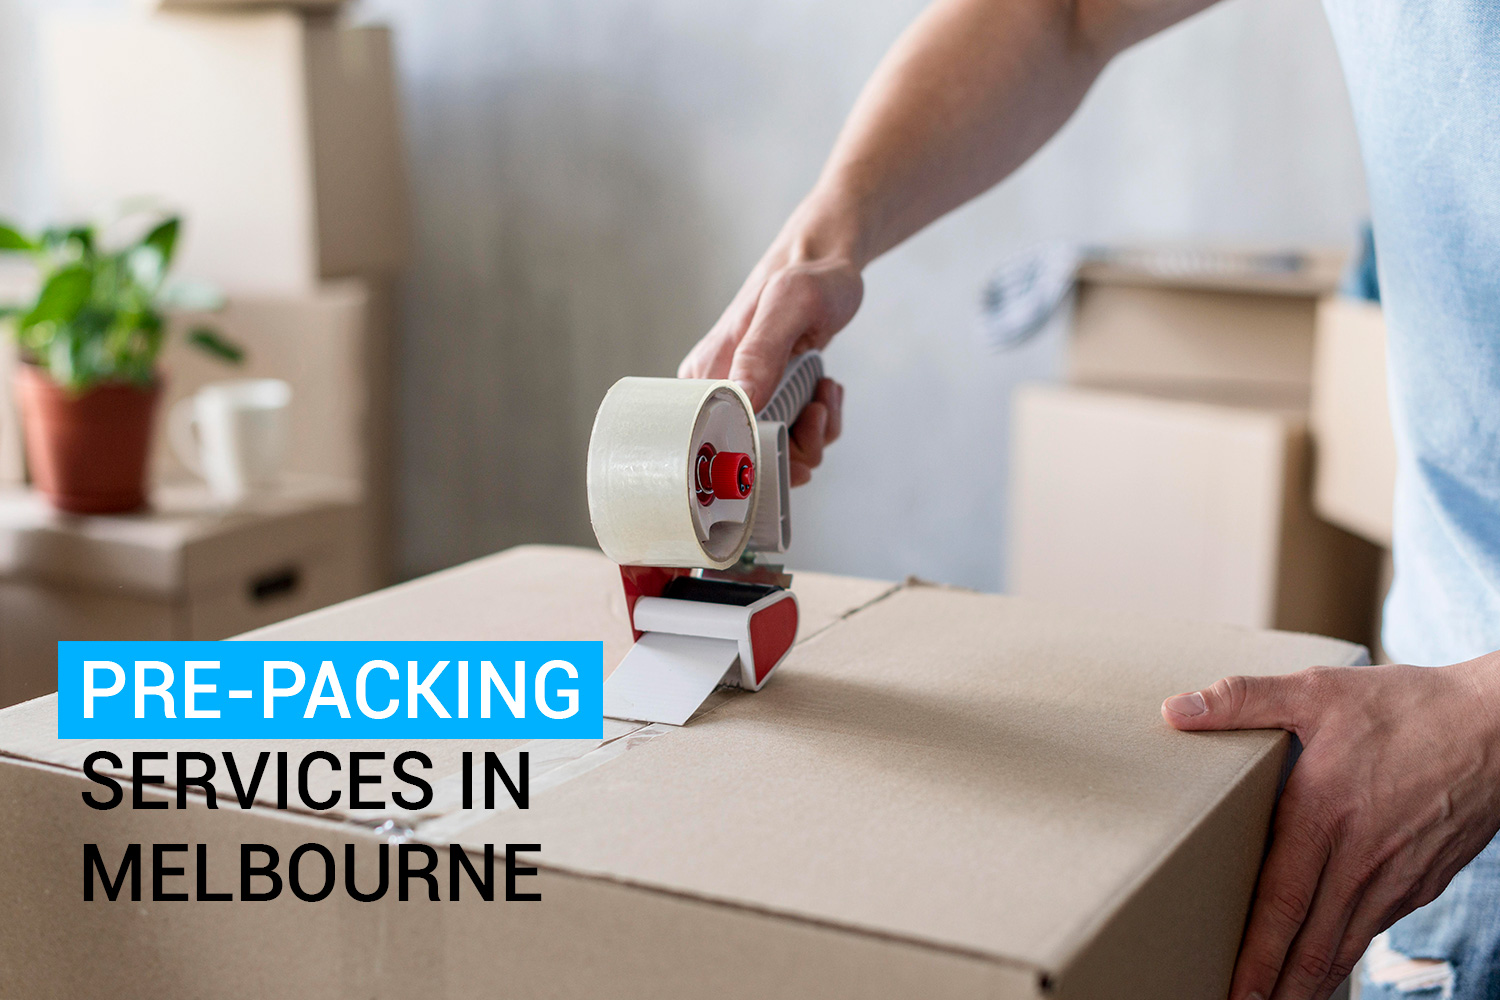 Hire Professional Pre-Packing Services in Melbourne